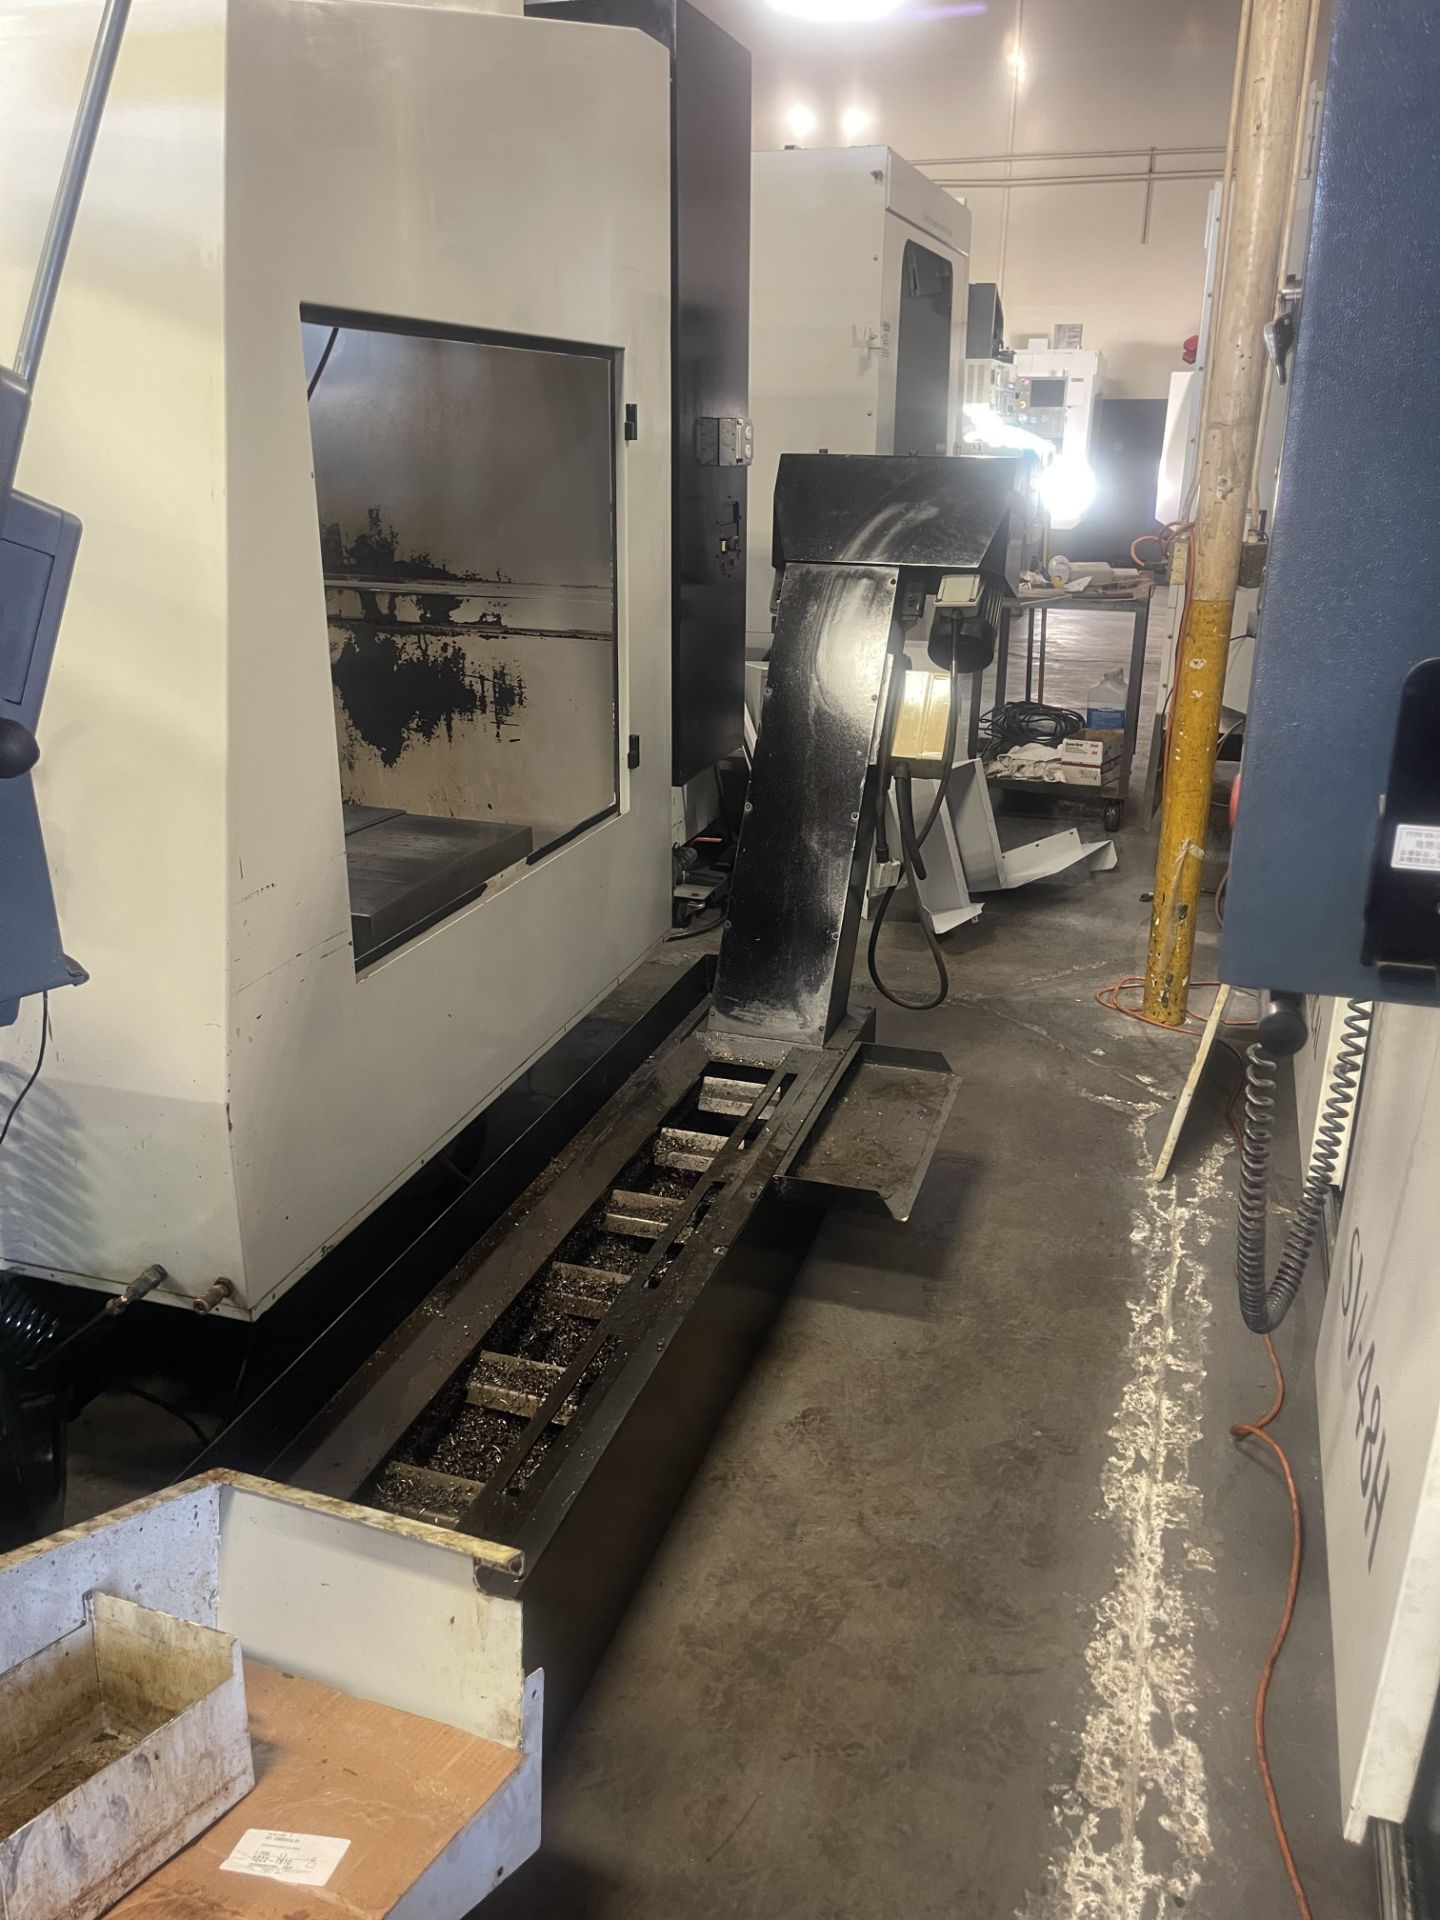 2006 Hurco VMX42, CNC Vertical Machining Centers - Image 5 of 8